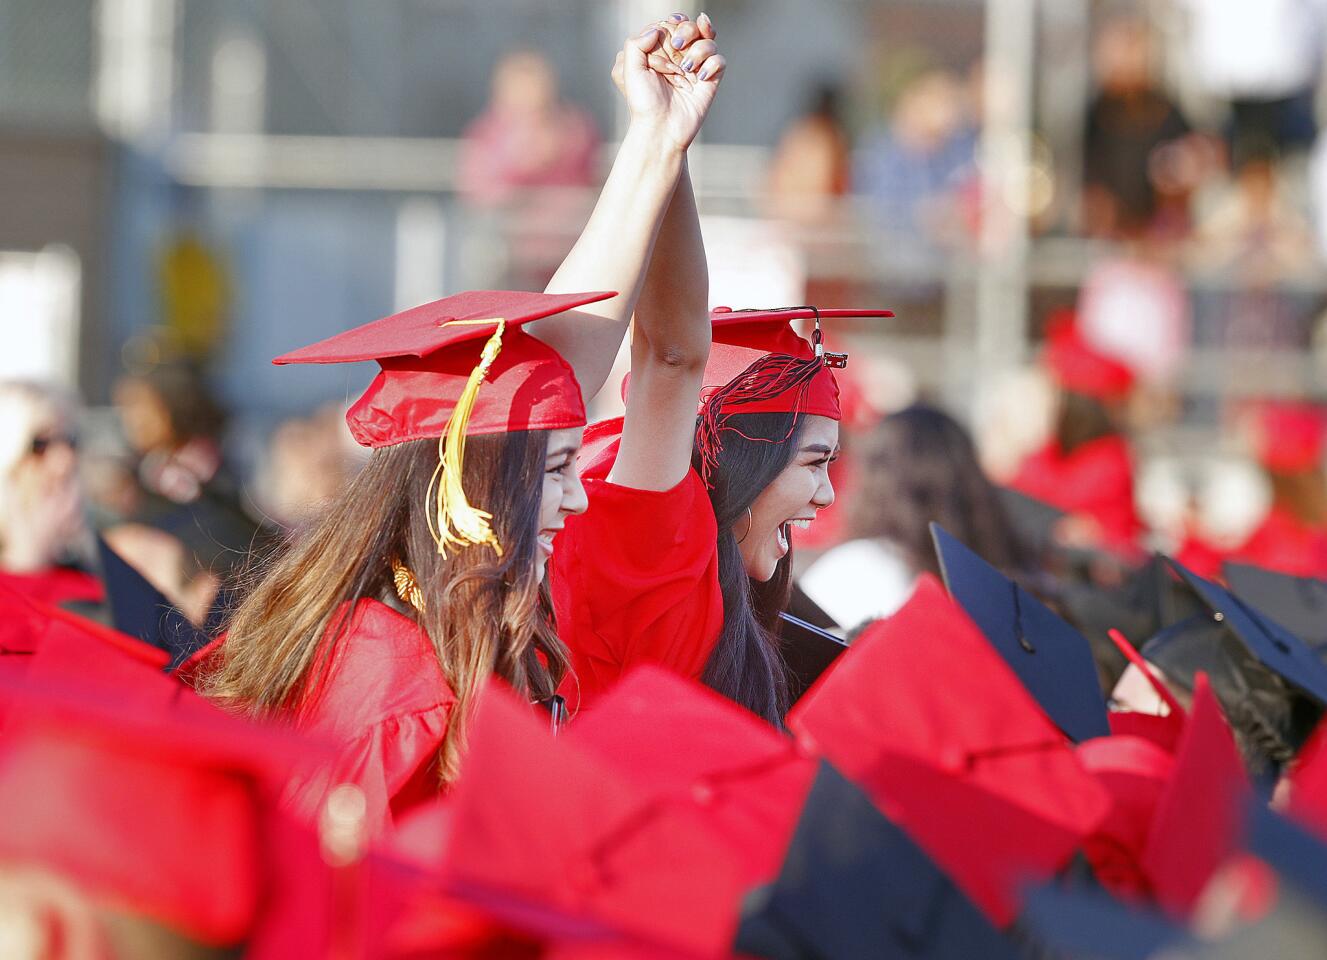 Glendale High School graduates Brenda Cocic and Andie Rodeo celebrate together after graduating at the graduation of the Glendale High School class of 2018 on Wednesday, June 6, 2018.